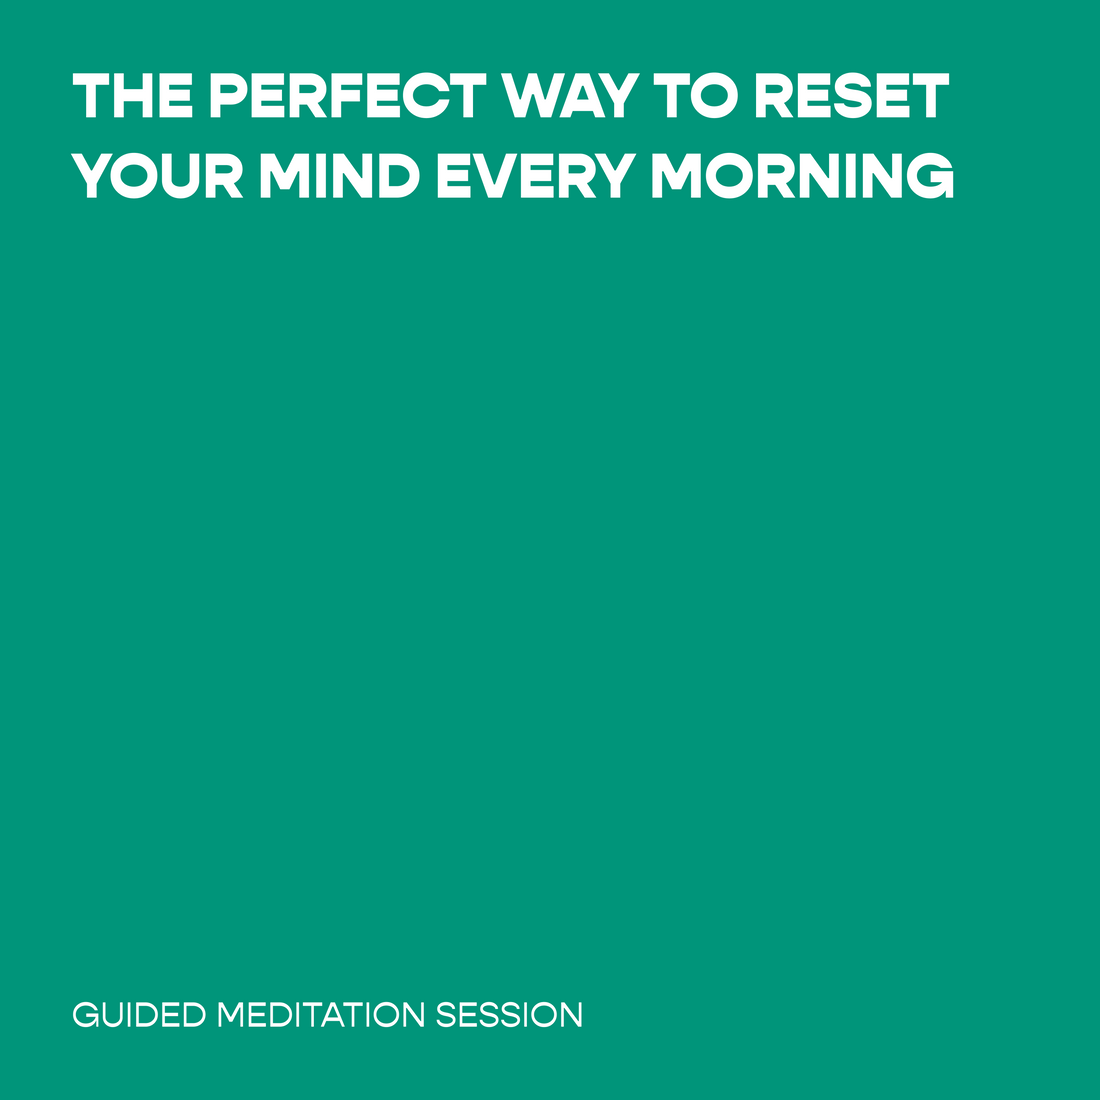 The Perfect Way to Reset Your Mind Every Morning